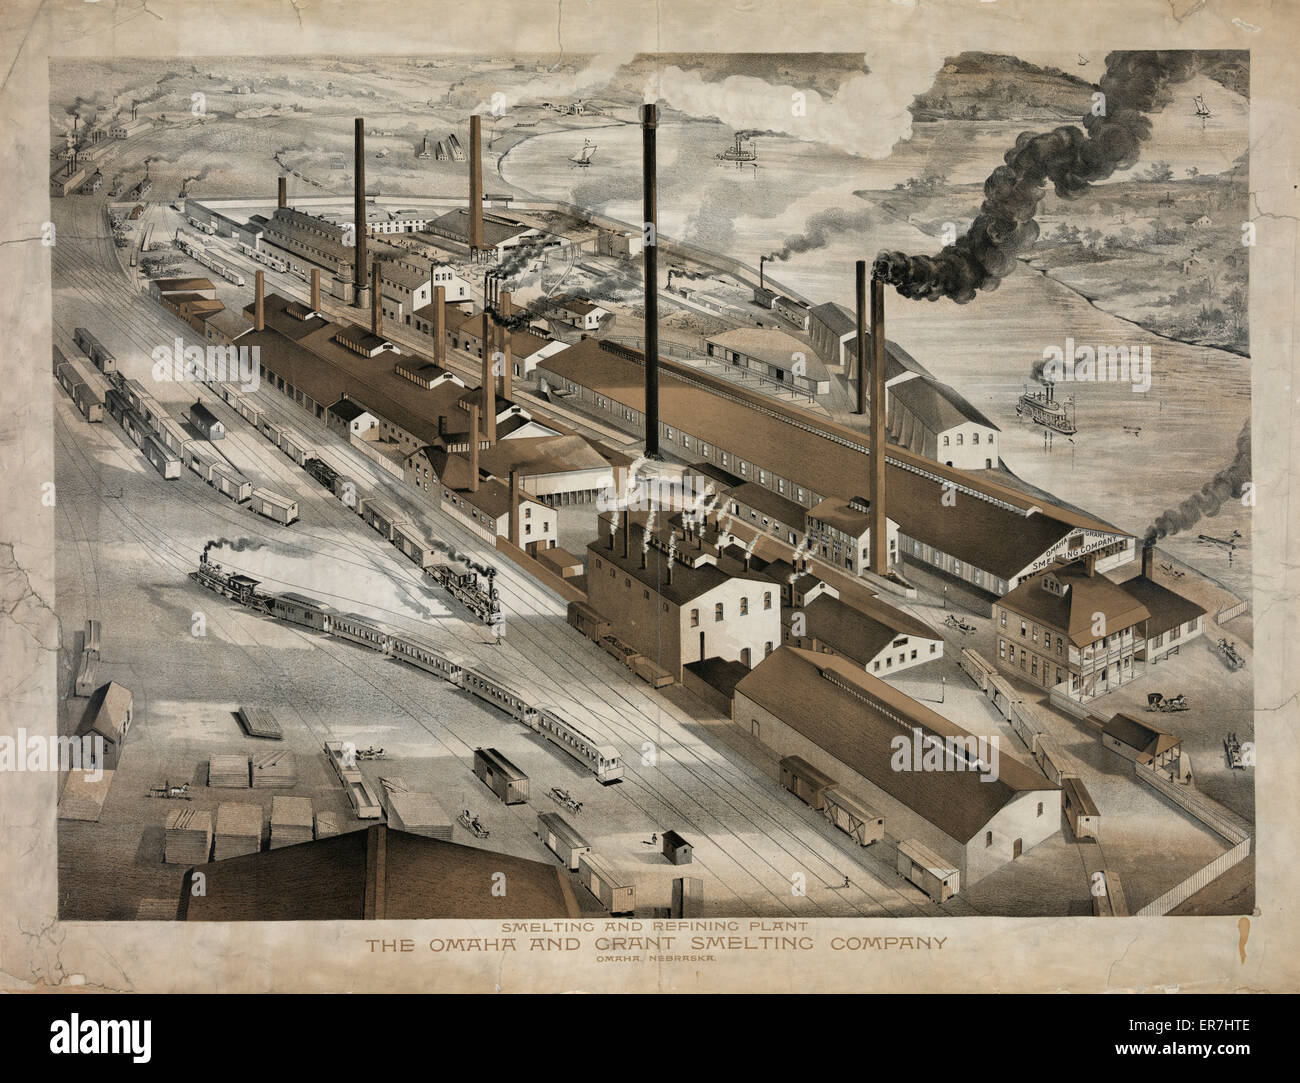 Smelting and refining plant, The Omaha and Grant Smelting Co Stock Photo